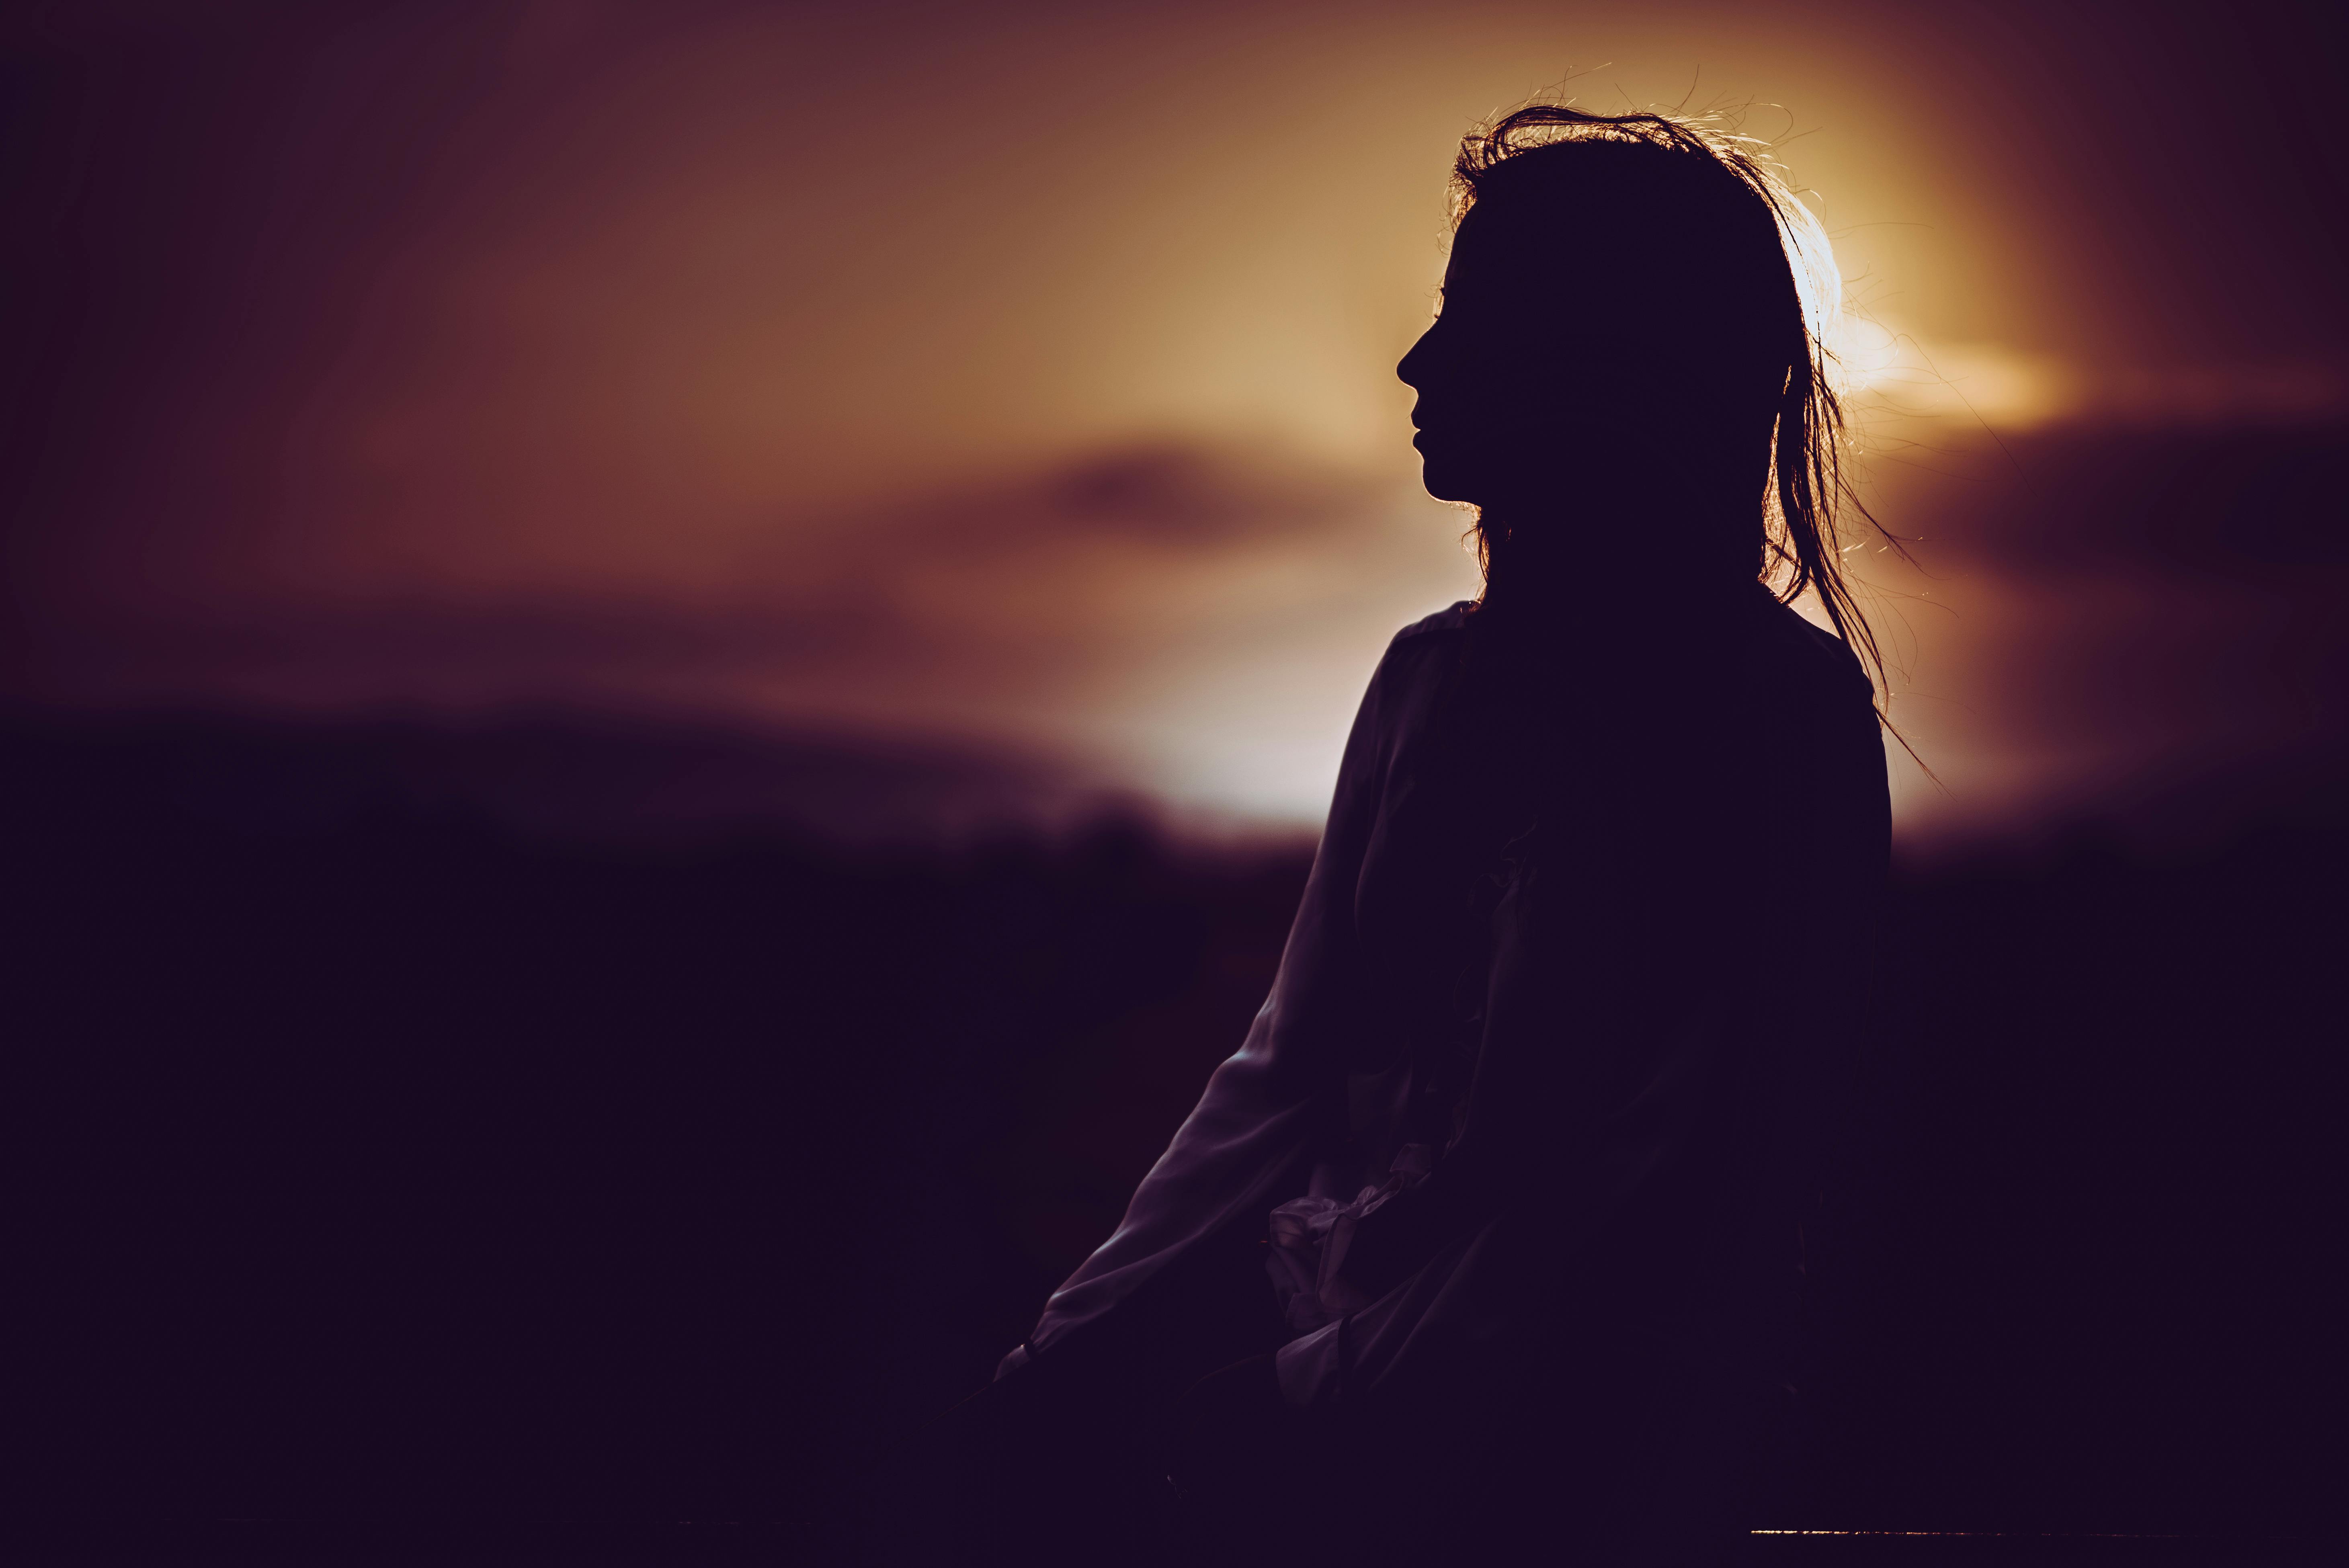 Woman Silhouette Photos, Download The BEST Free Woman Silhouette